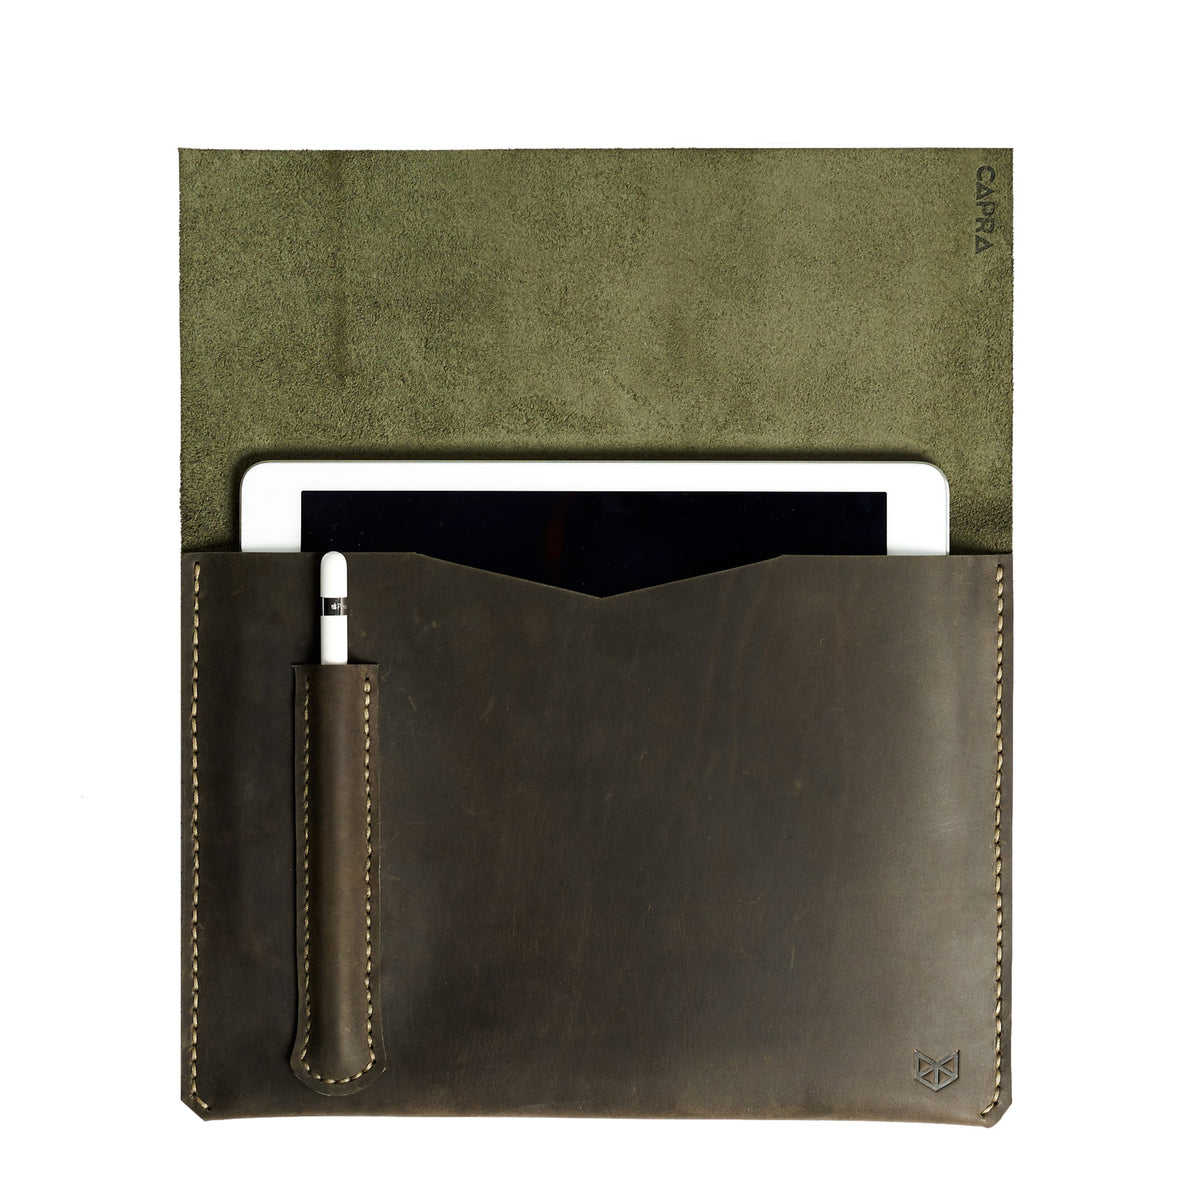 Green iPad pro leather sleeve with apple pencil holder